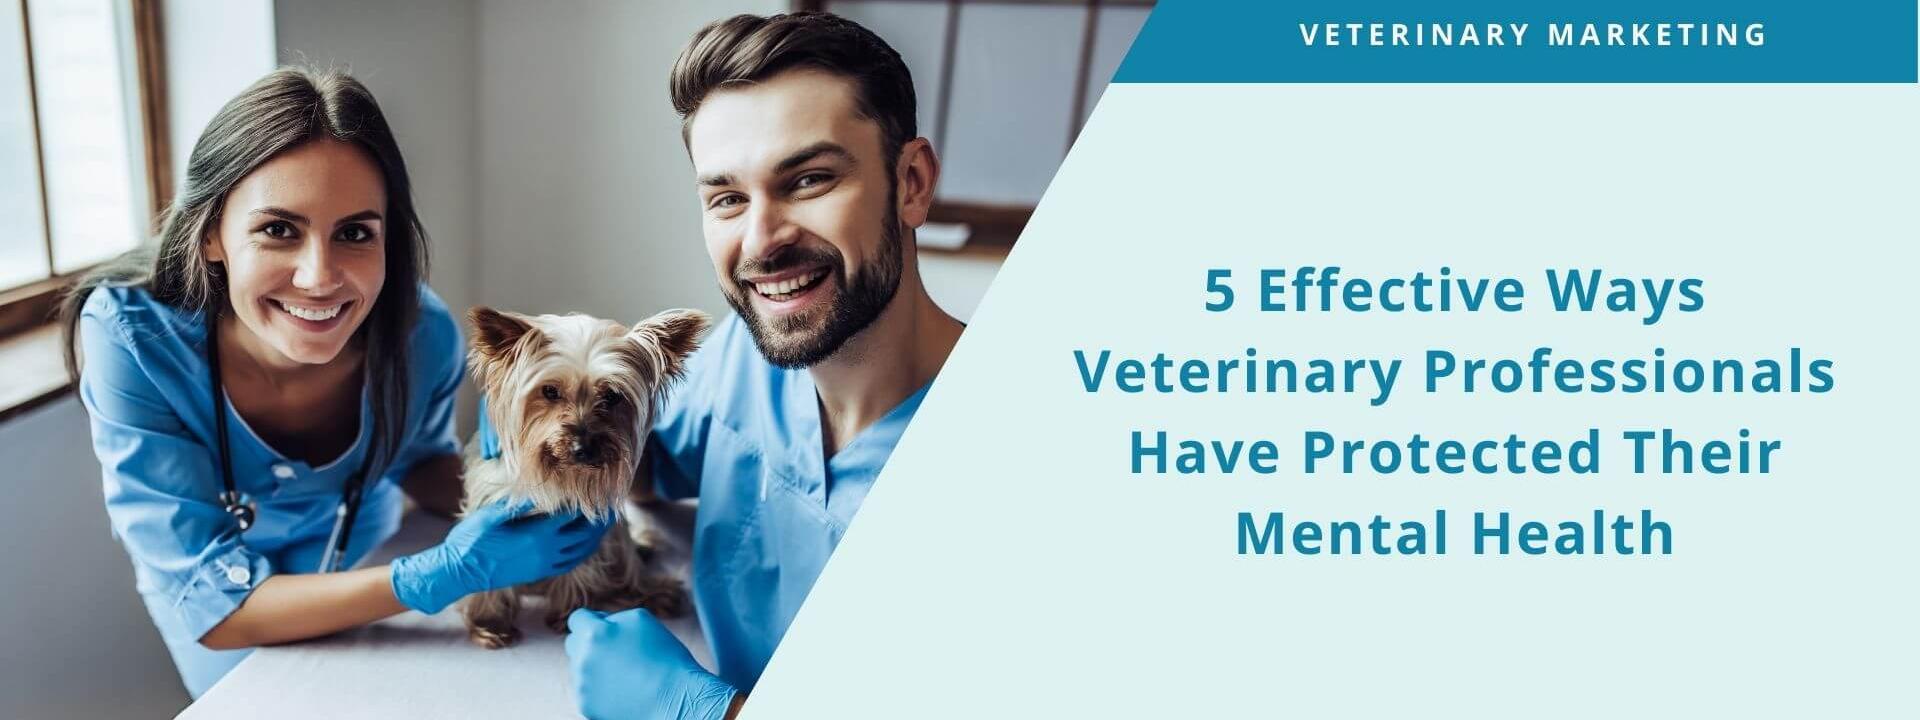 How veterinary professionals protect their mental health